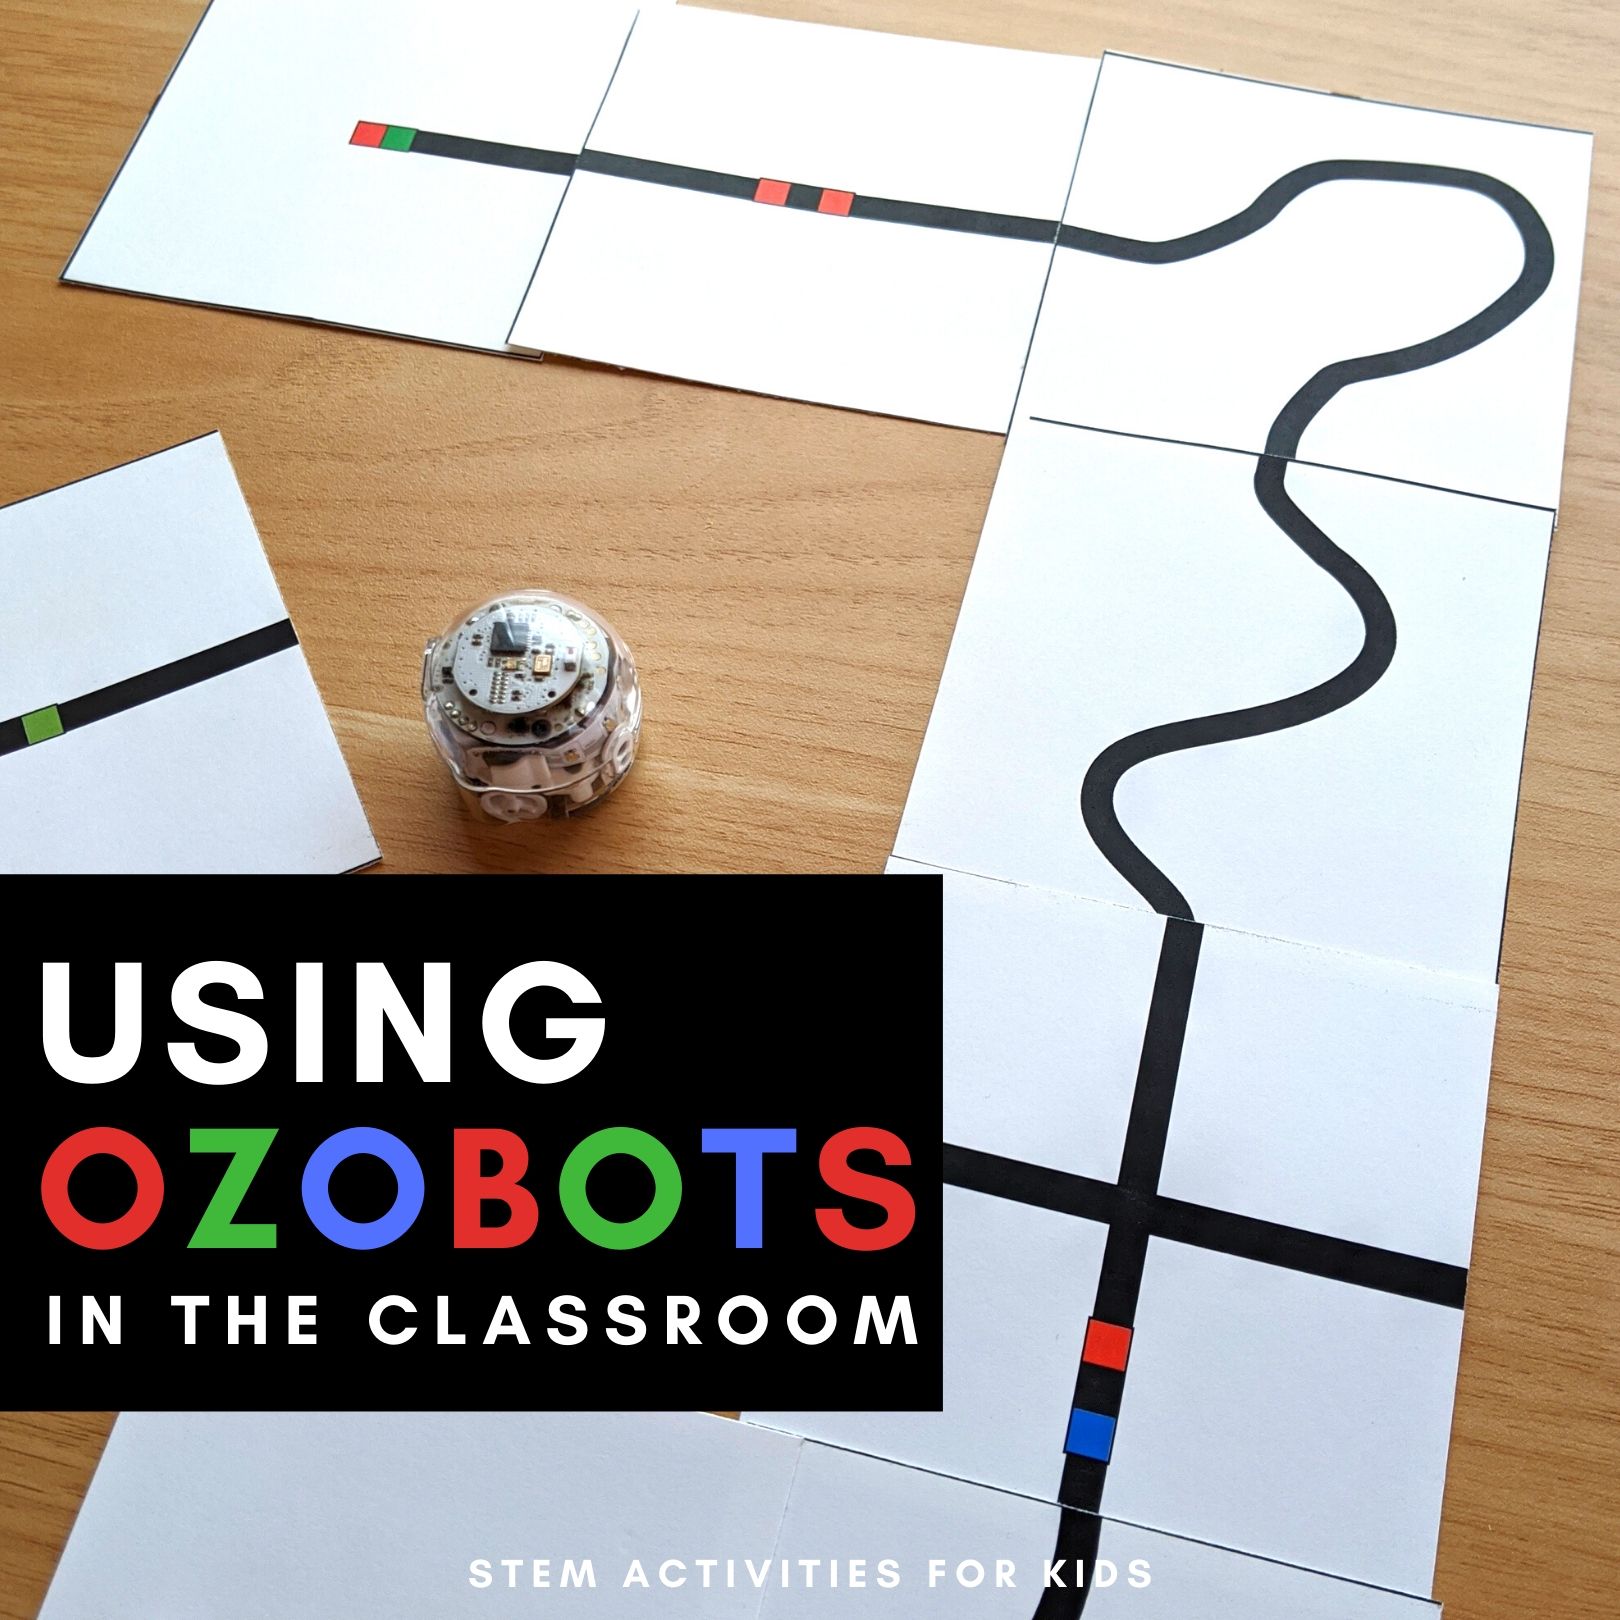 https://stemactivitiesforkids.com/wp-content/uploads/2020/03/Using-Ozobots-in-the-Classroom.jpg